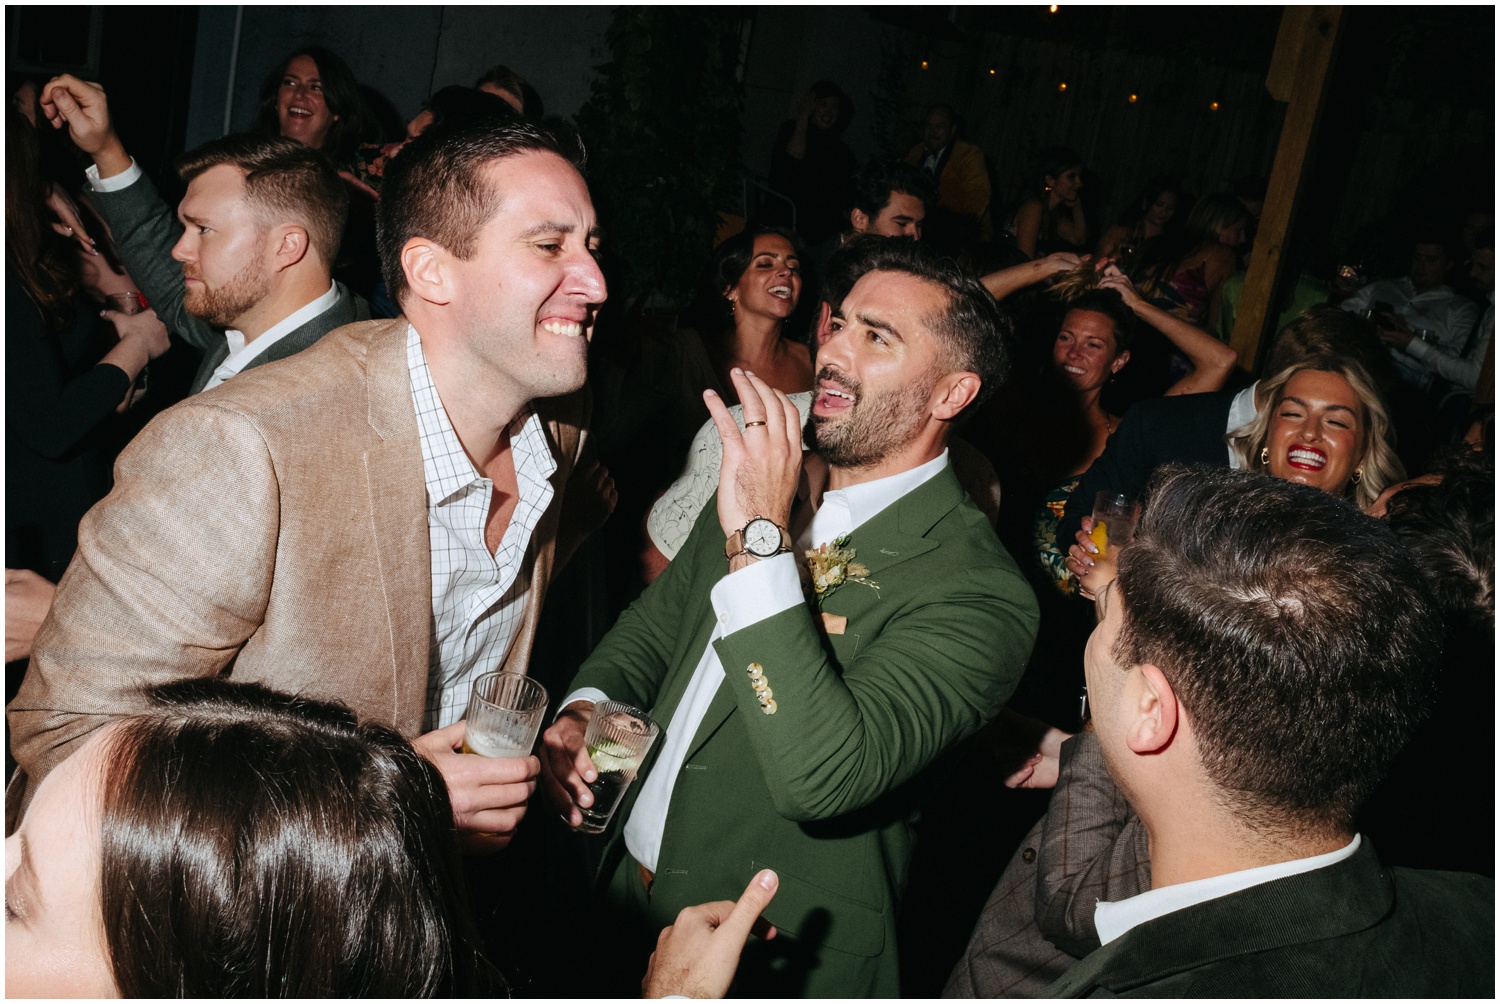 The groom dances with guests at his wedding at Martha Philadelphia.